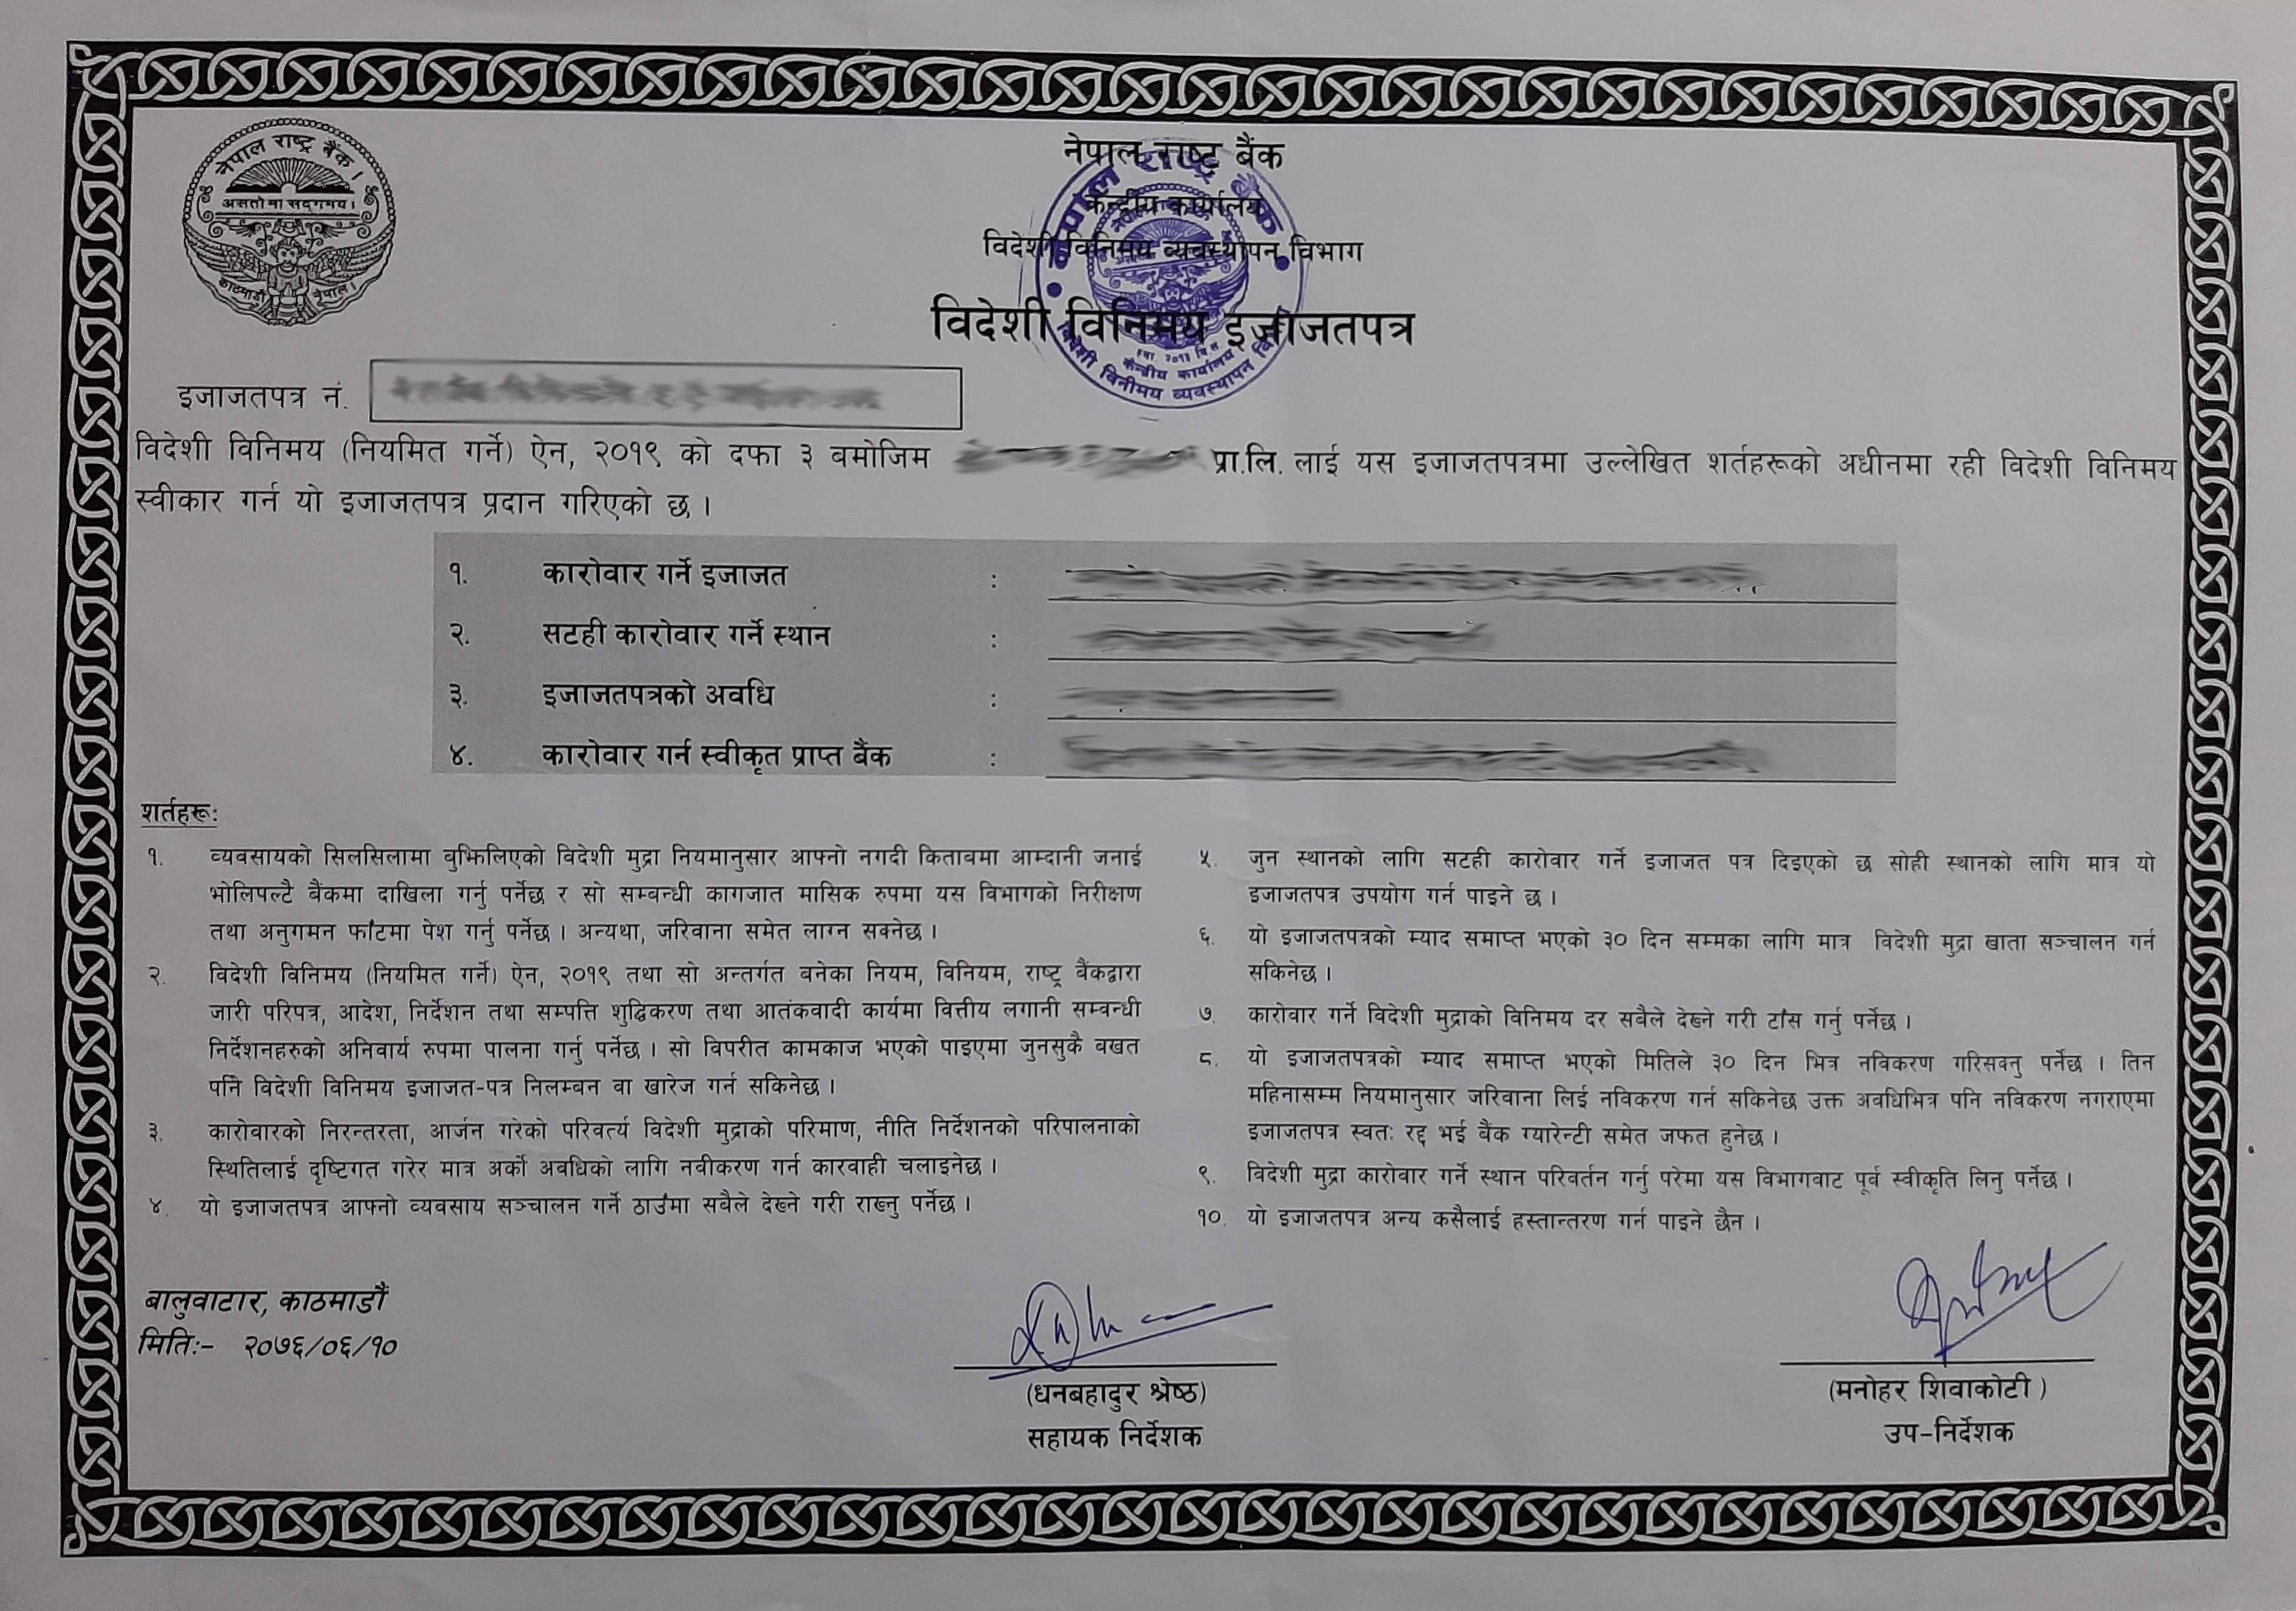 Approval Certificate from Nepal Rastra Bank